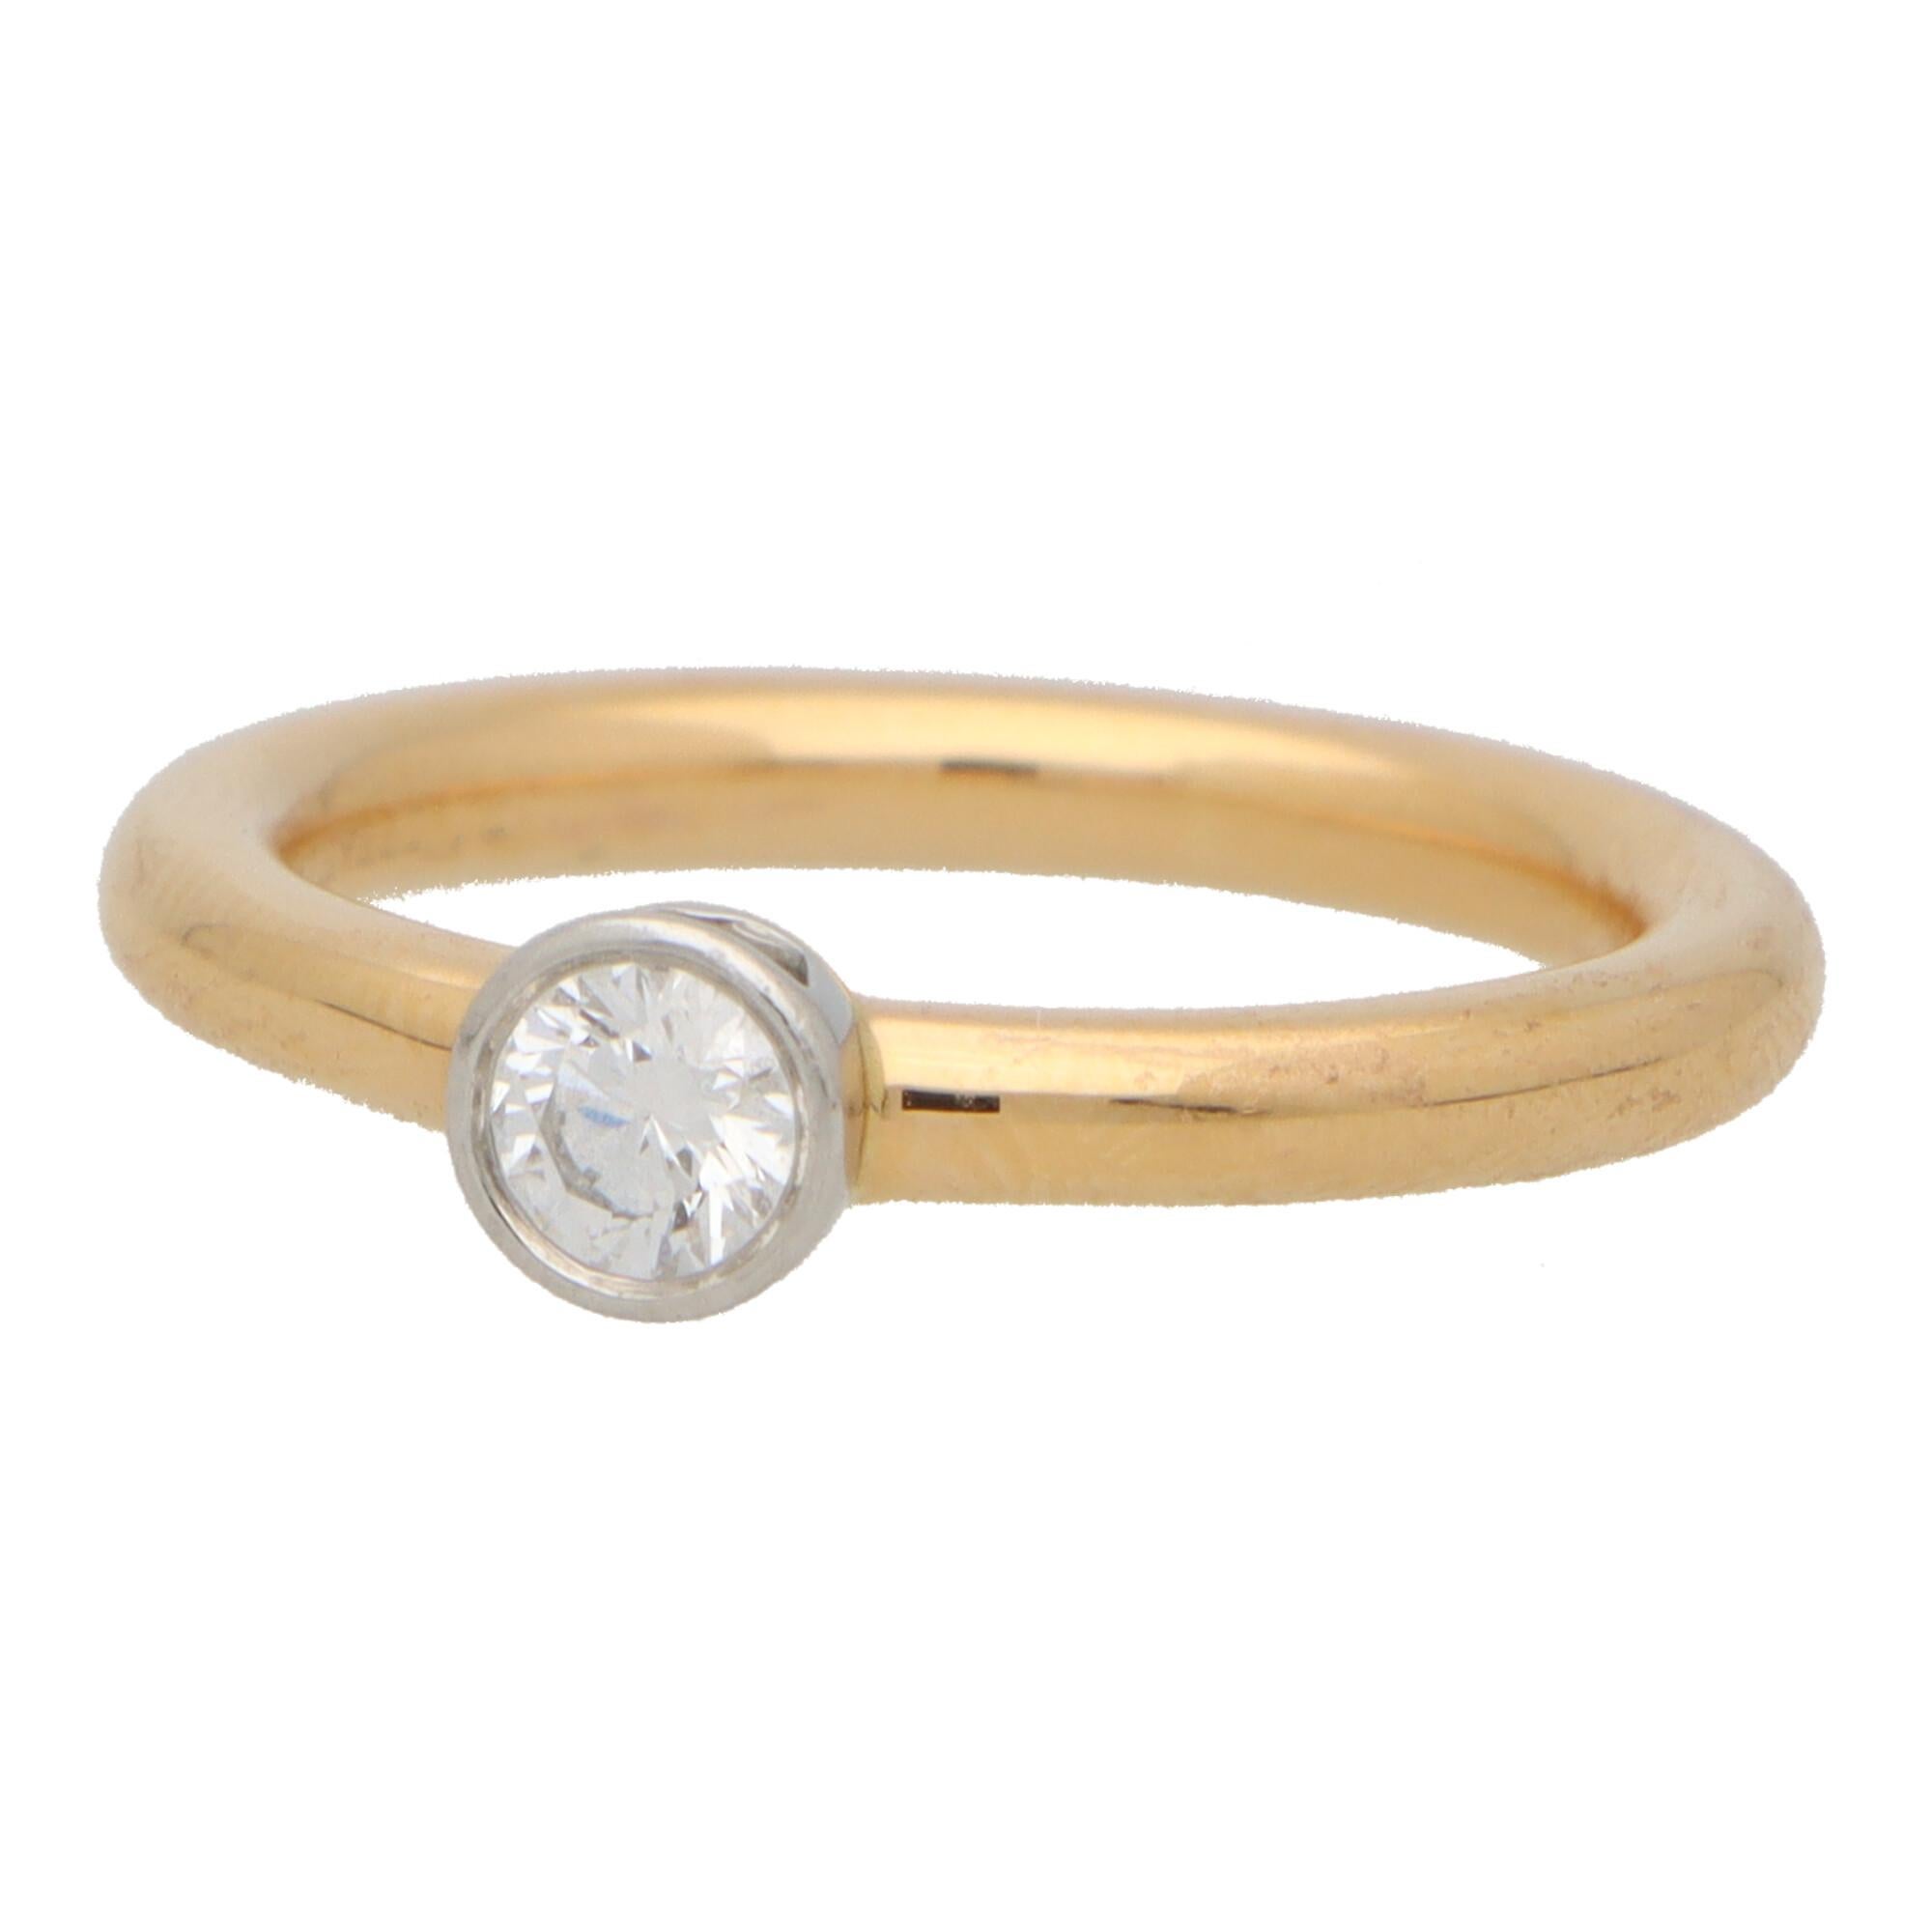 A beautiful vintage Tiffany & Co. single solitaire ring set in 18k rose gold and platinum.

The piece solely features a beautiful 0.20 carat round brilliant diamond. The diamond is bezel set to centre which flows round nicely to a 2.5-millimetre